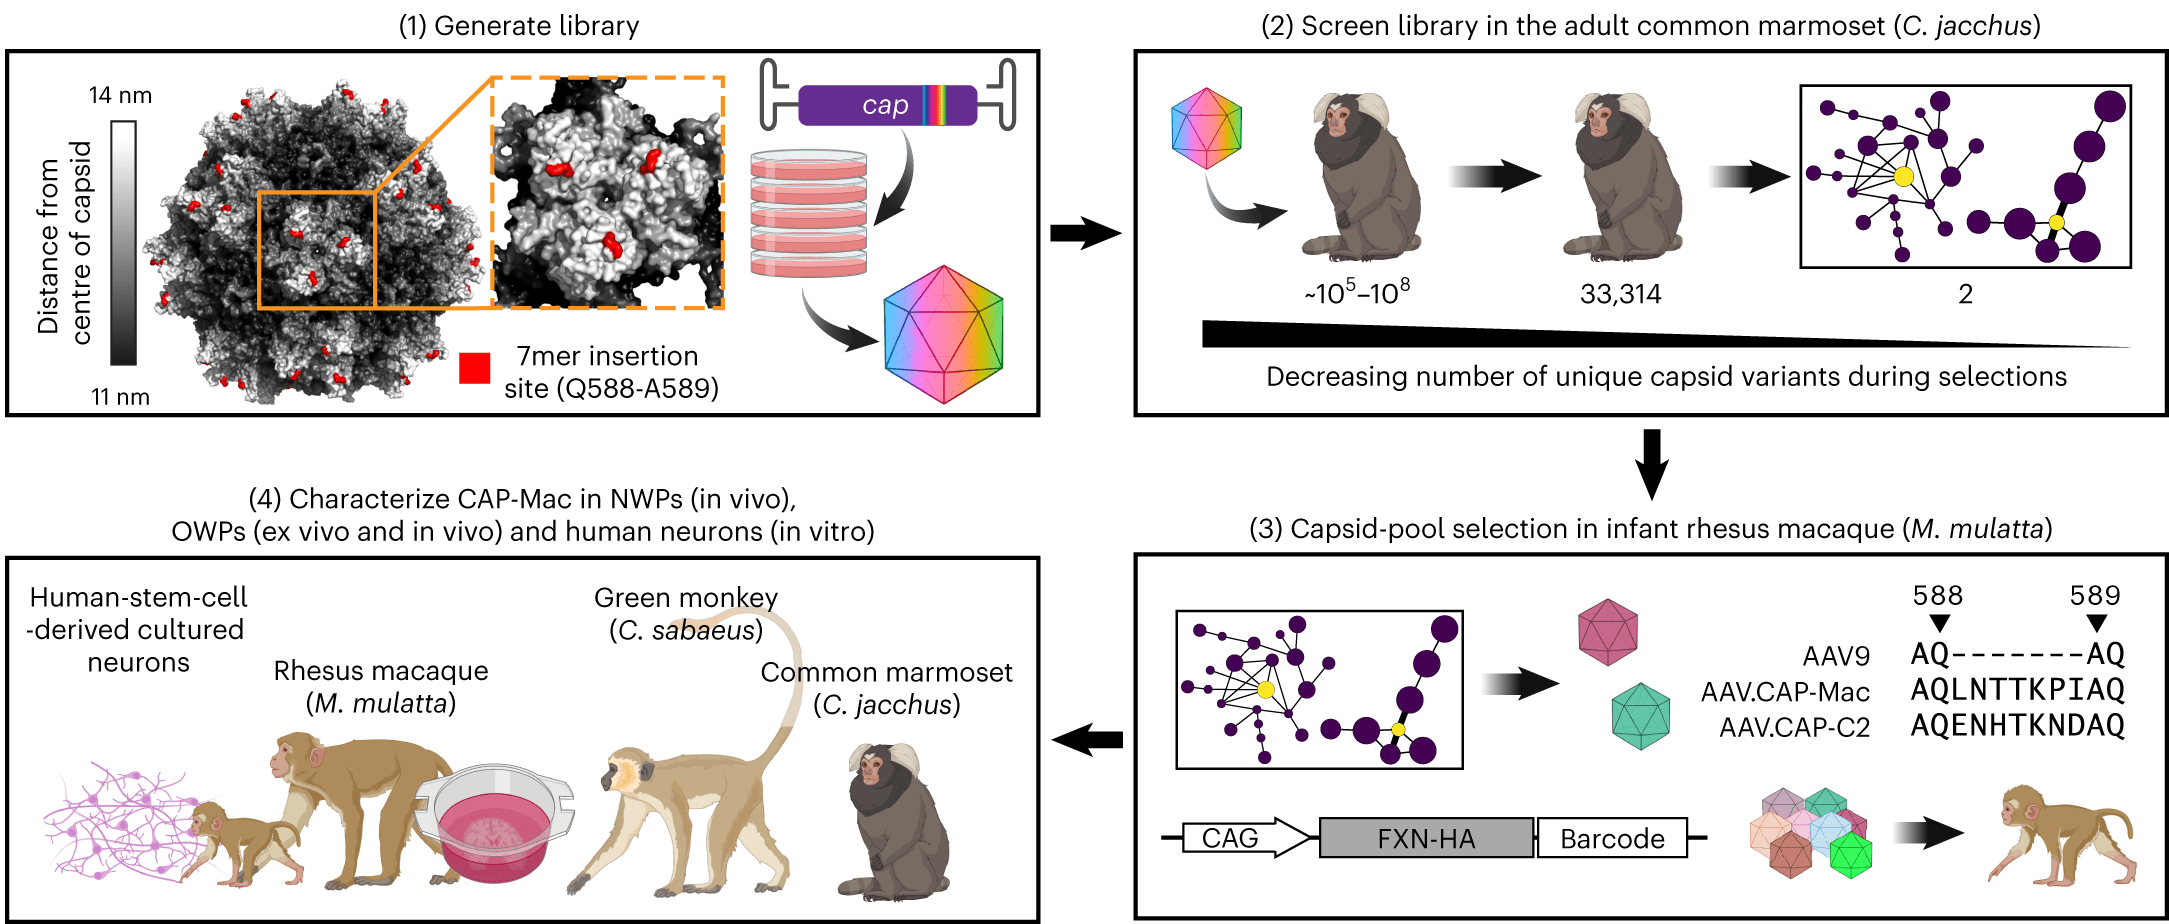 Four-part schematic: (1) Generate library; (2) Screen library in the adult common marmoset (C. jacchus); (3) Capsid-pool selection in infant rhesus macaque (M. mulatta); (4) Characterize CAP-Mac in NWPs (in vivo), OWPs (ex vivo and in vivo) and human neurons (in vitro). For full details please see the cited article (Chuapoco 2023).